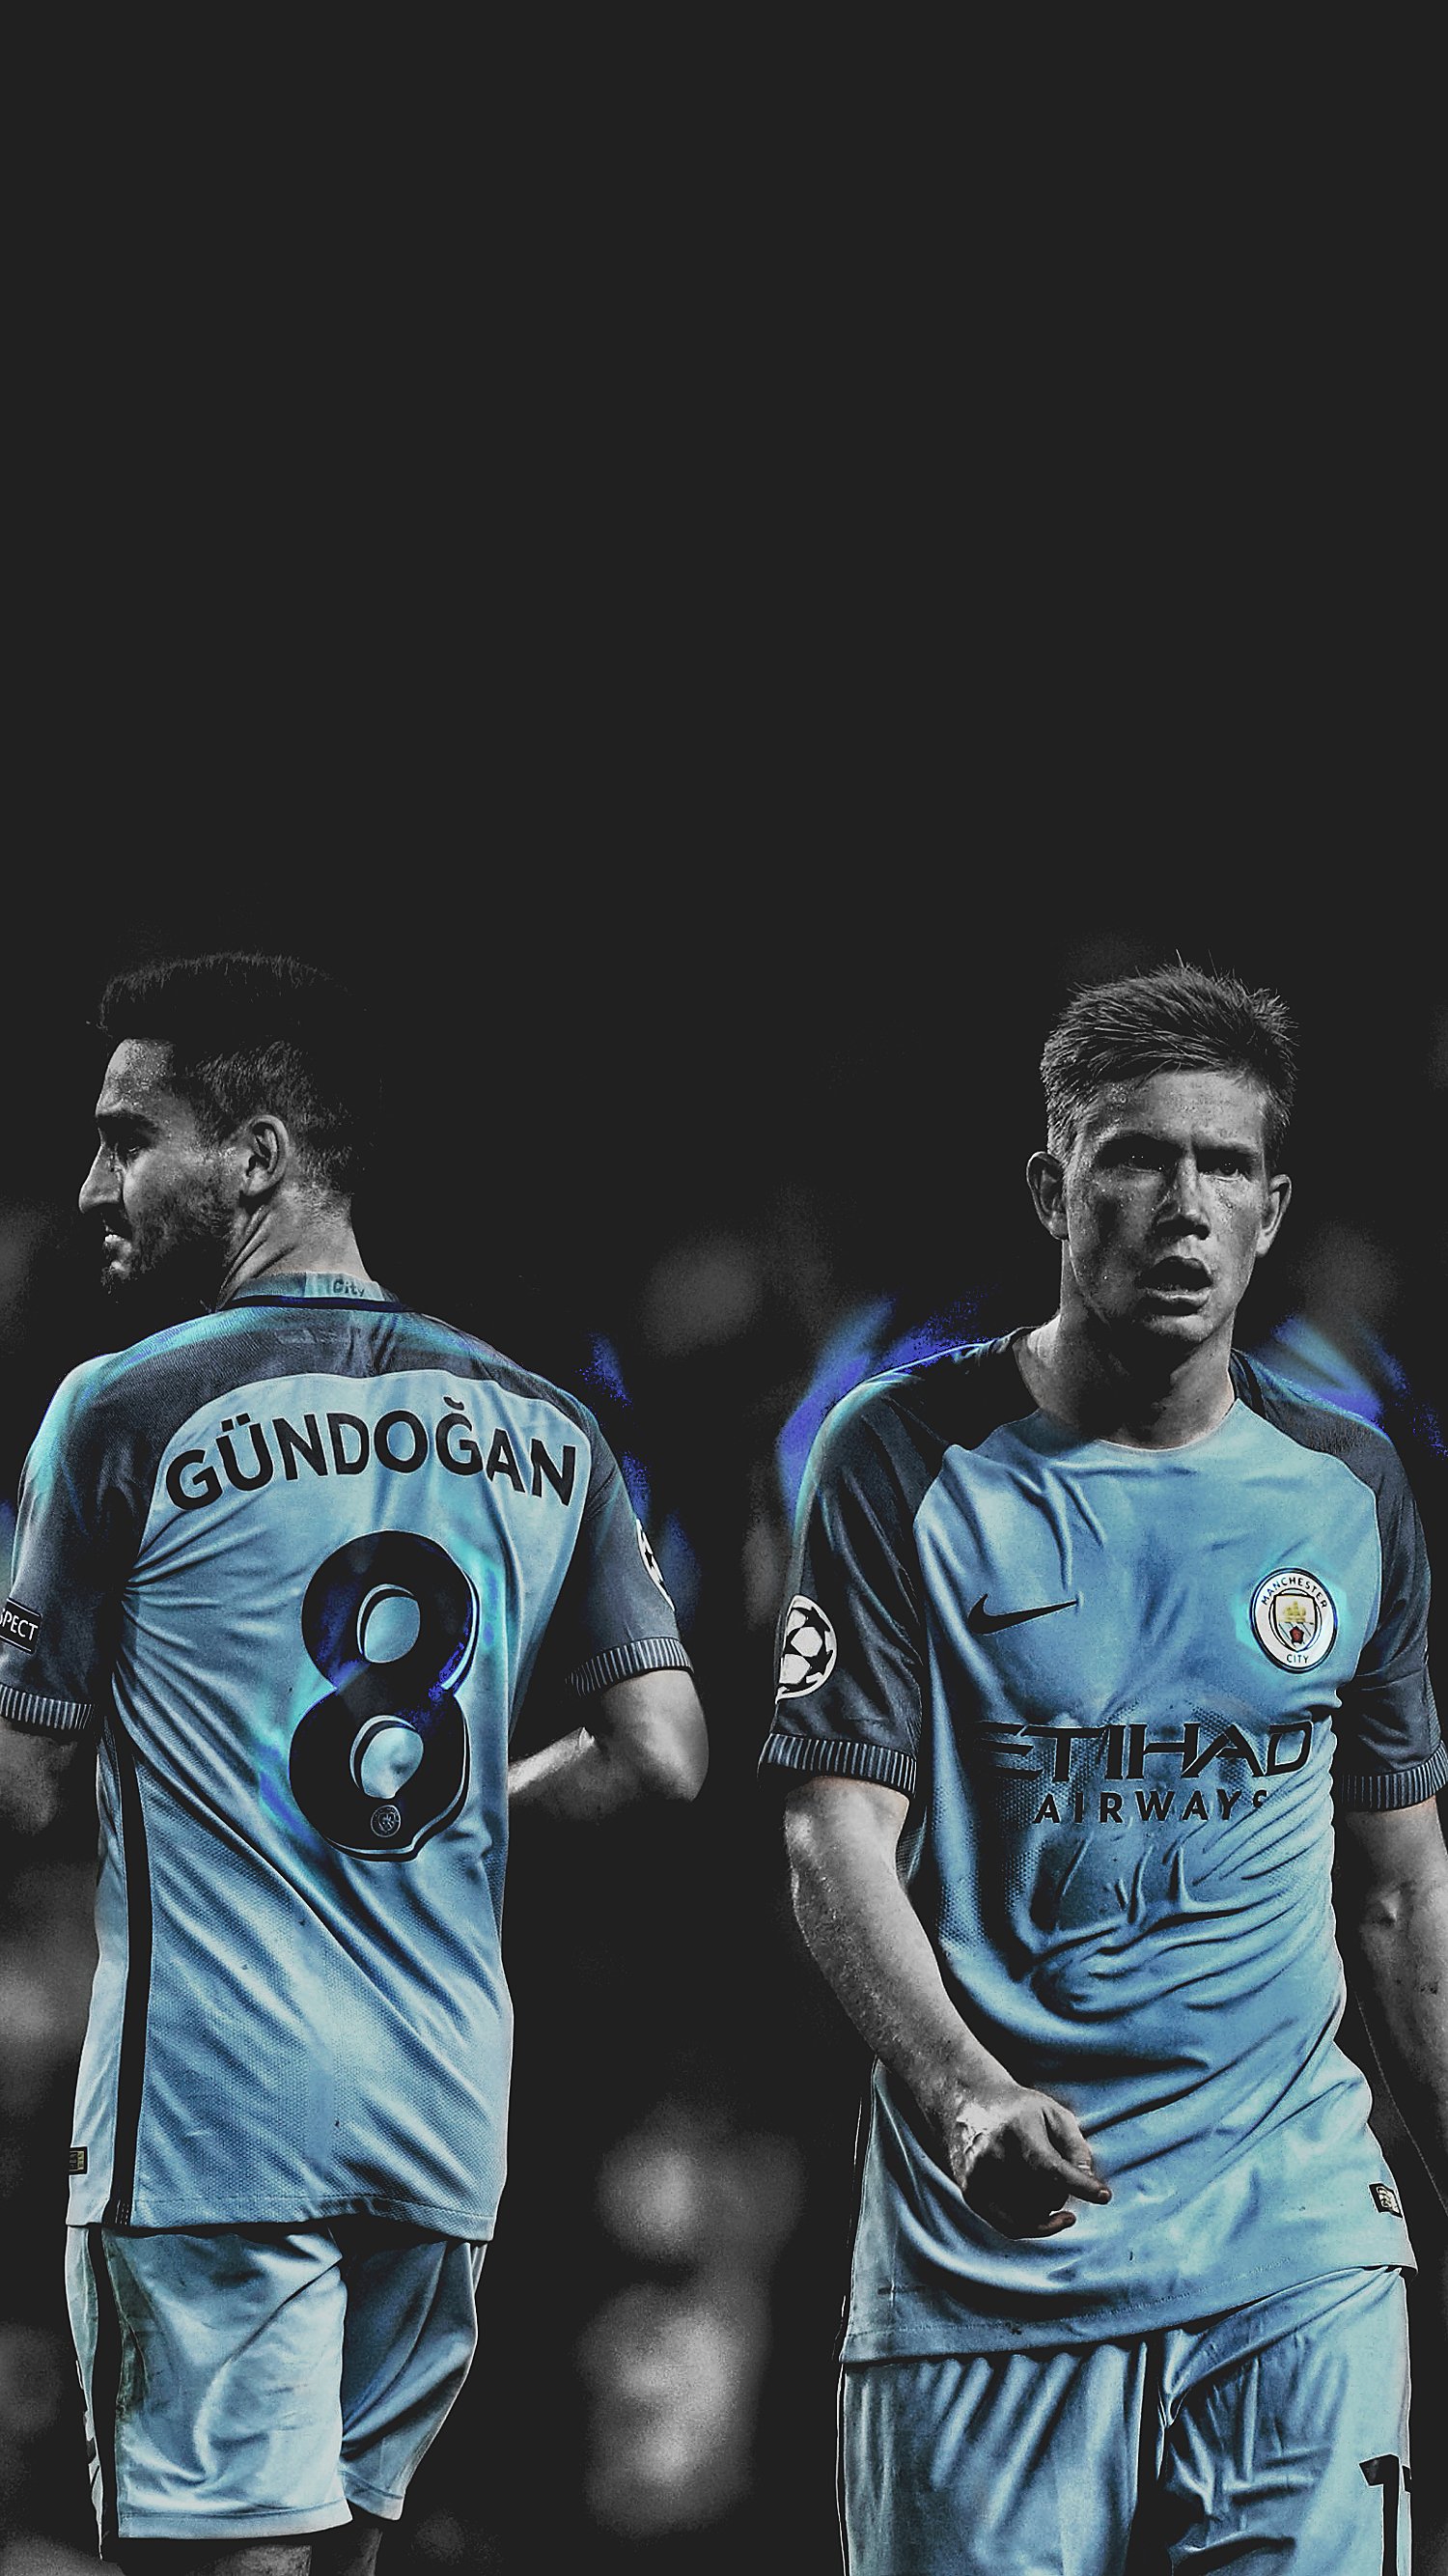 Footy Wallpaper City iPhone wallpaper. RTs much appreciated #UCL